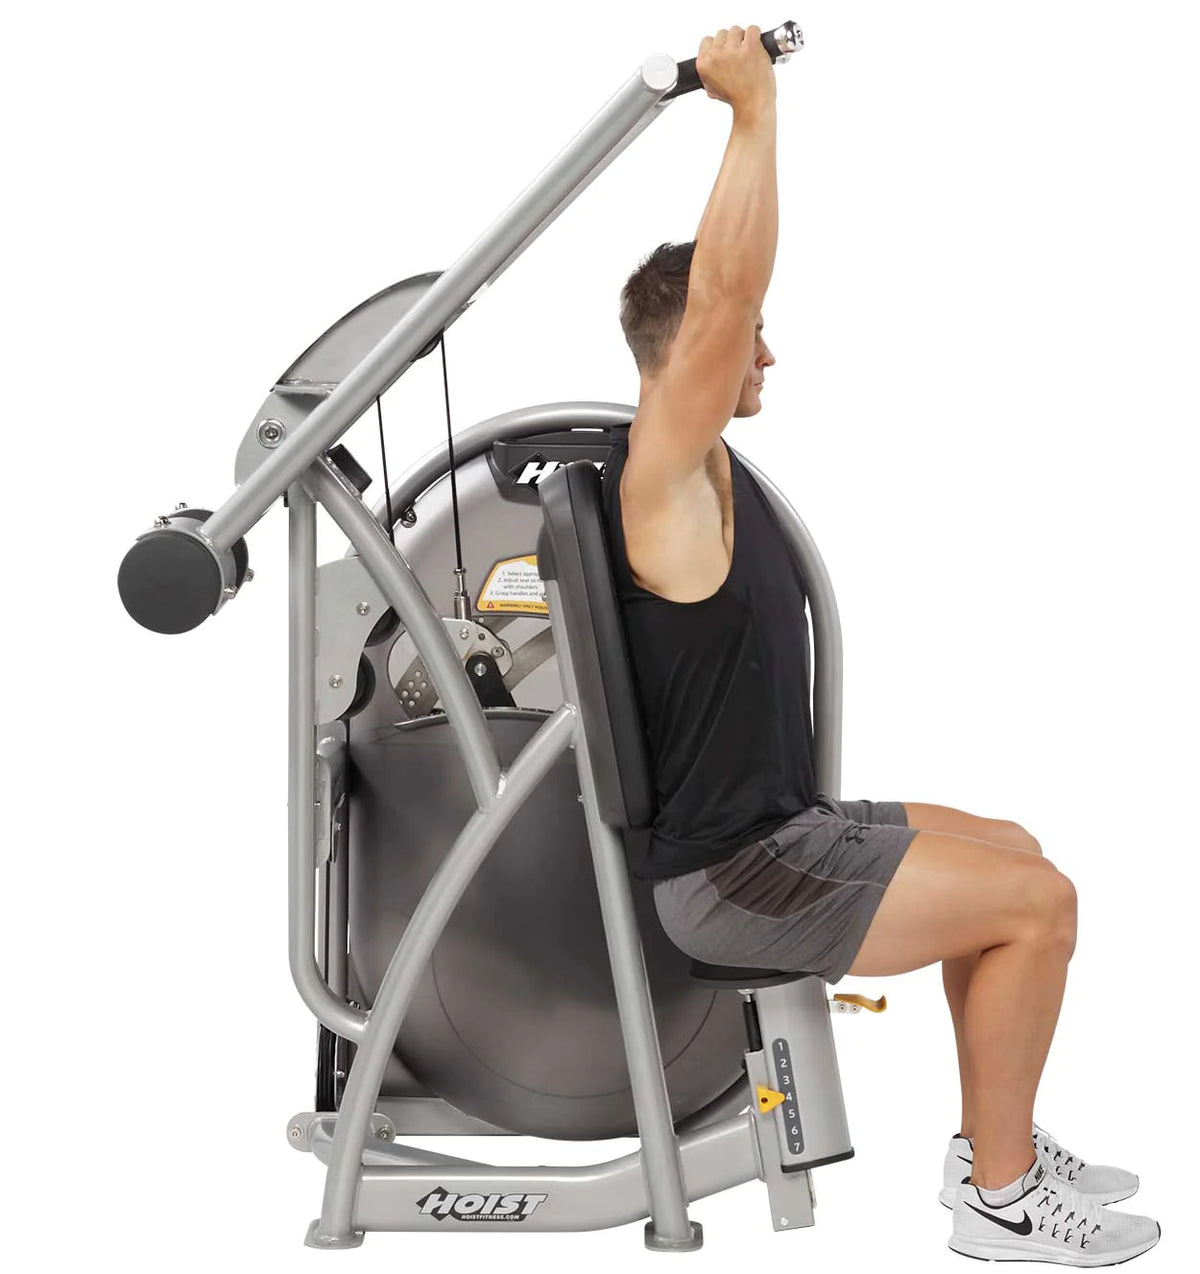 Hoist Clubline Shoulder Press in use | Fitness Experience